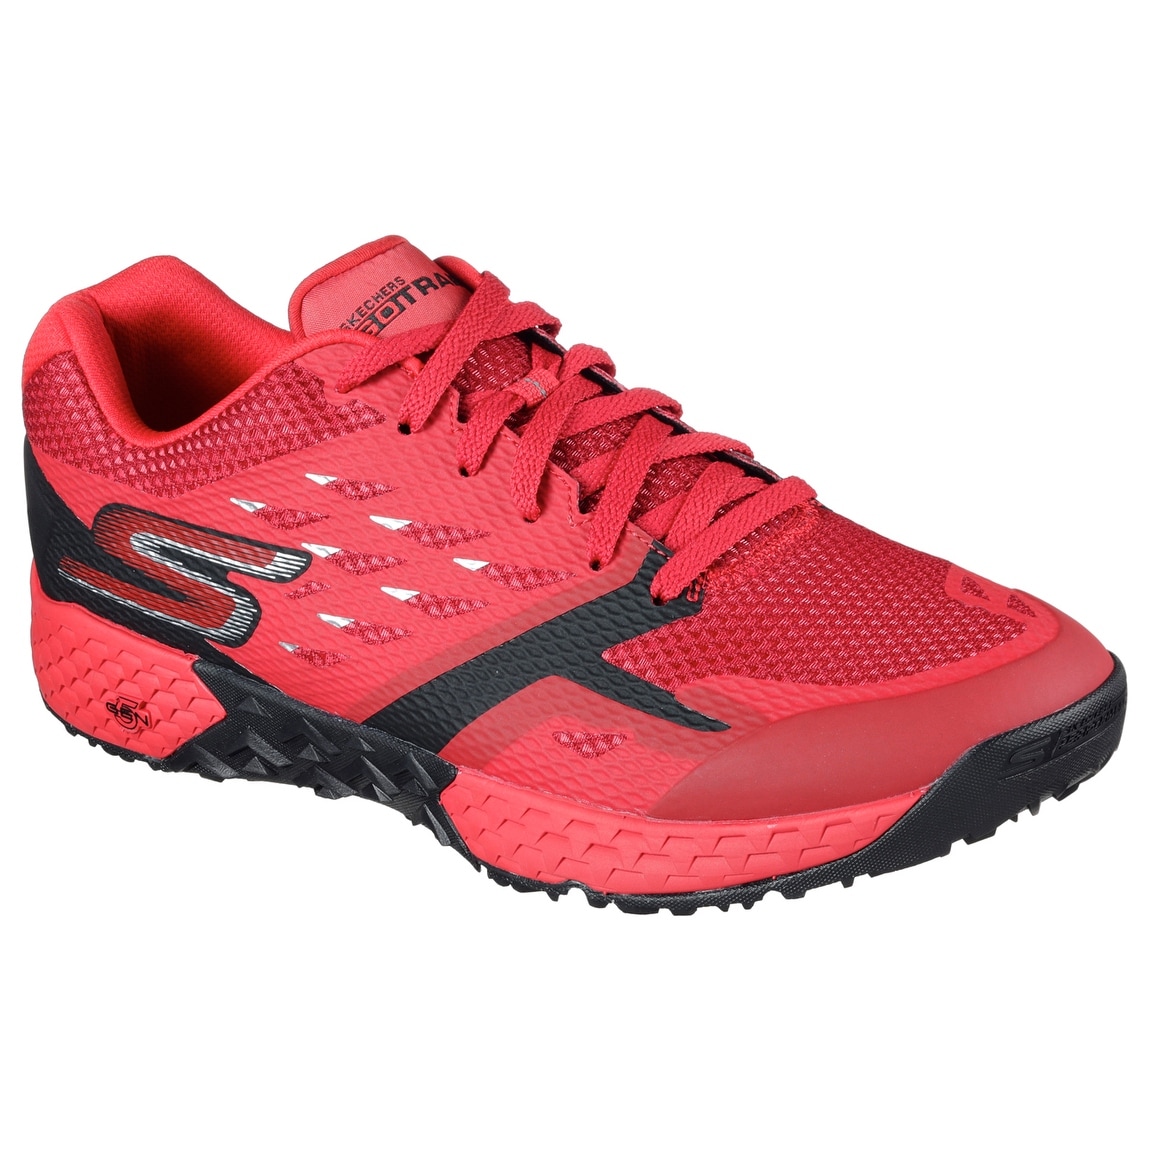 Skechers Go Train Review Clearance, SAVE 51%.